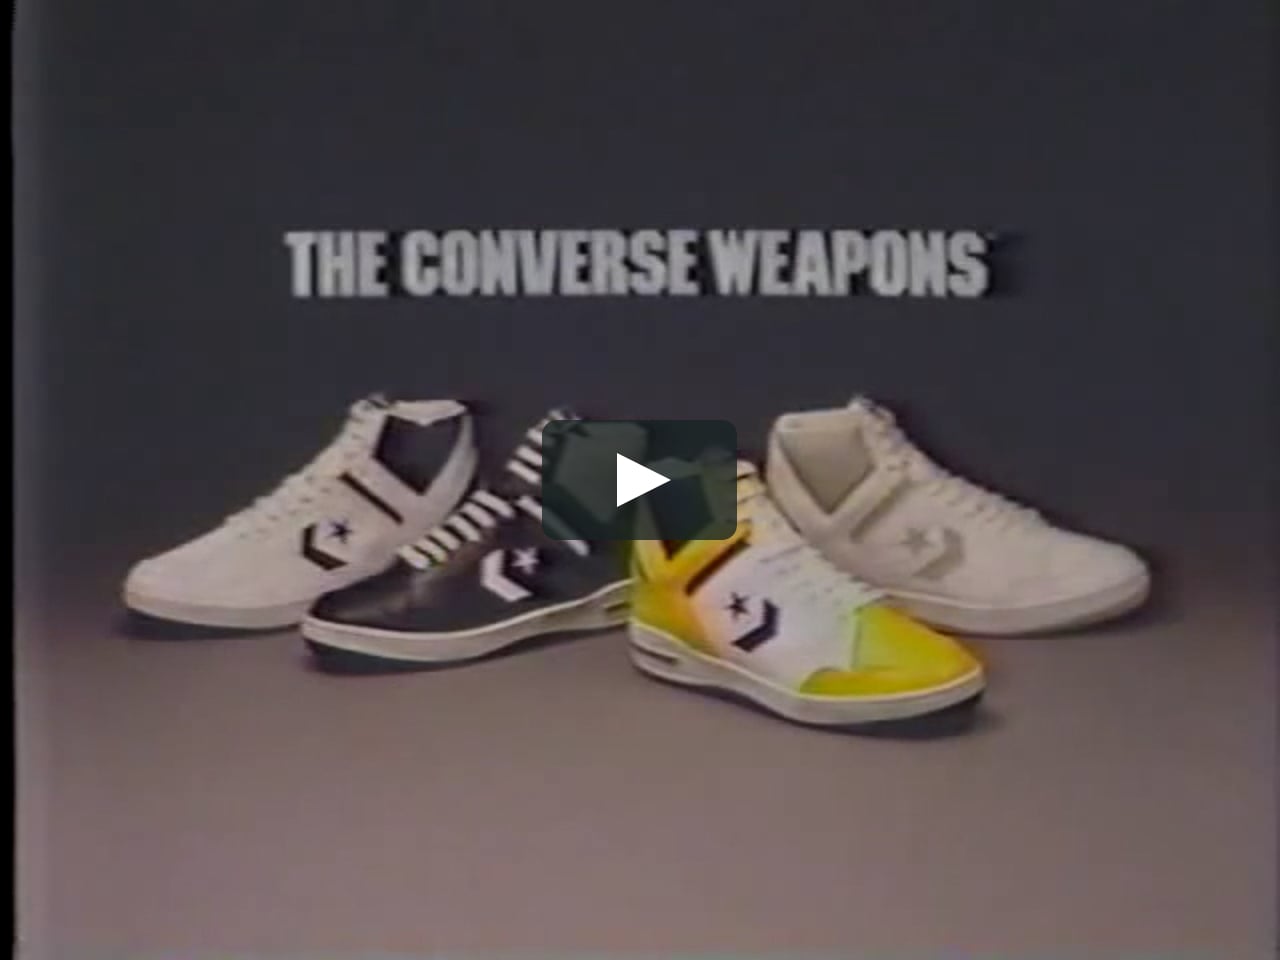 Converse Commercial (1986) with Larry Bird and Magic Johnson on Vimeo